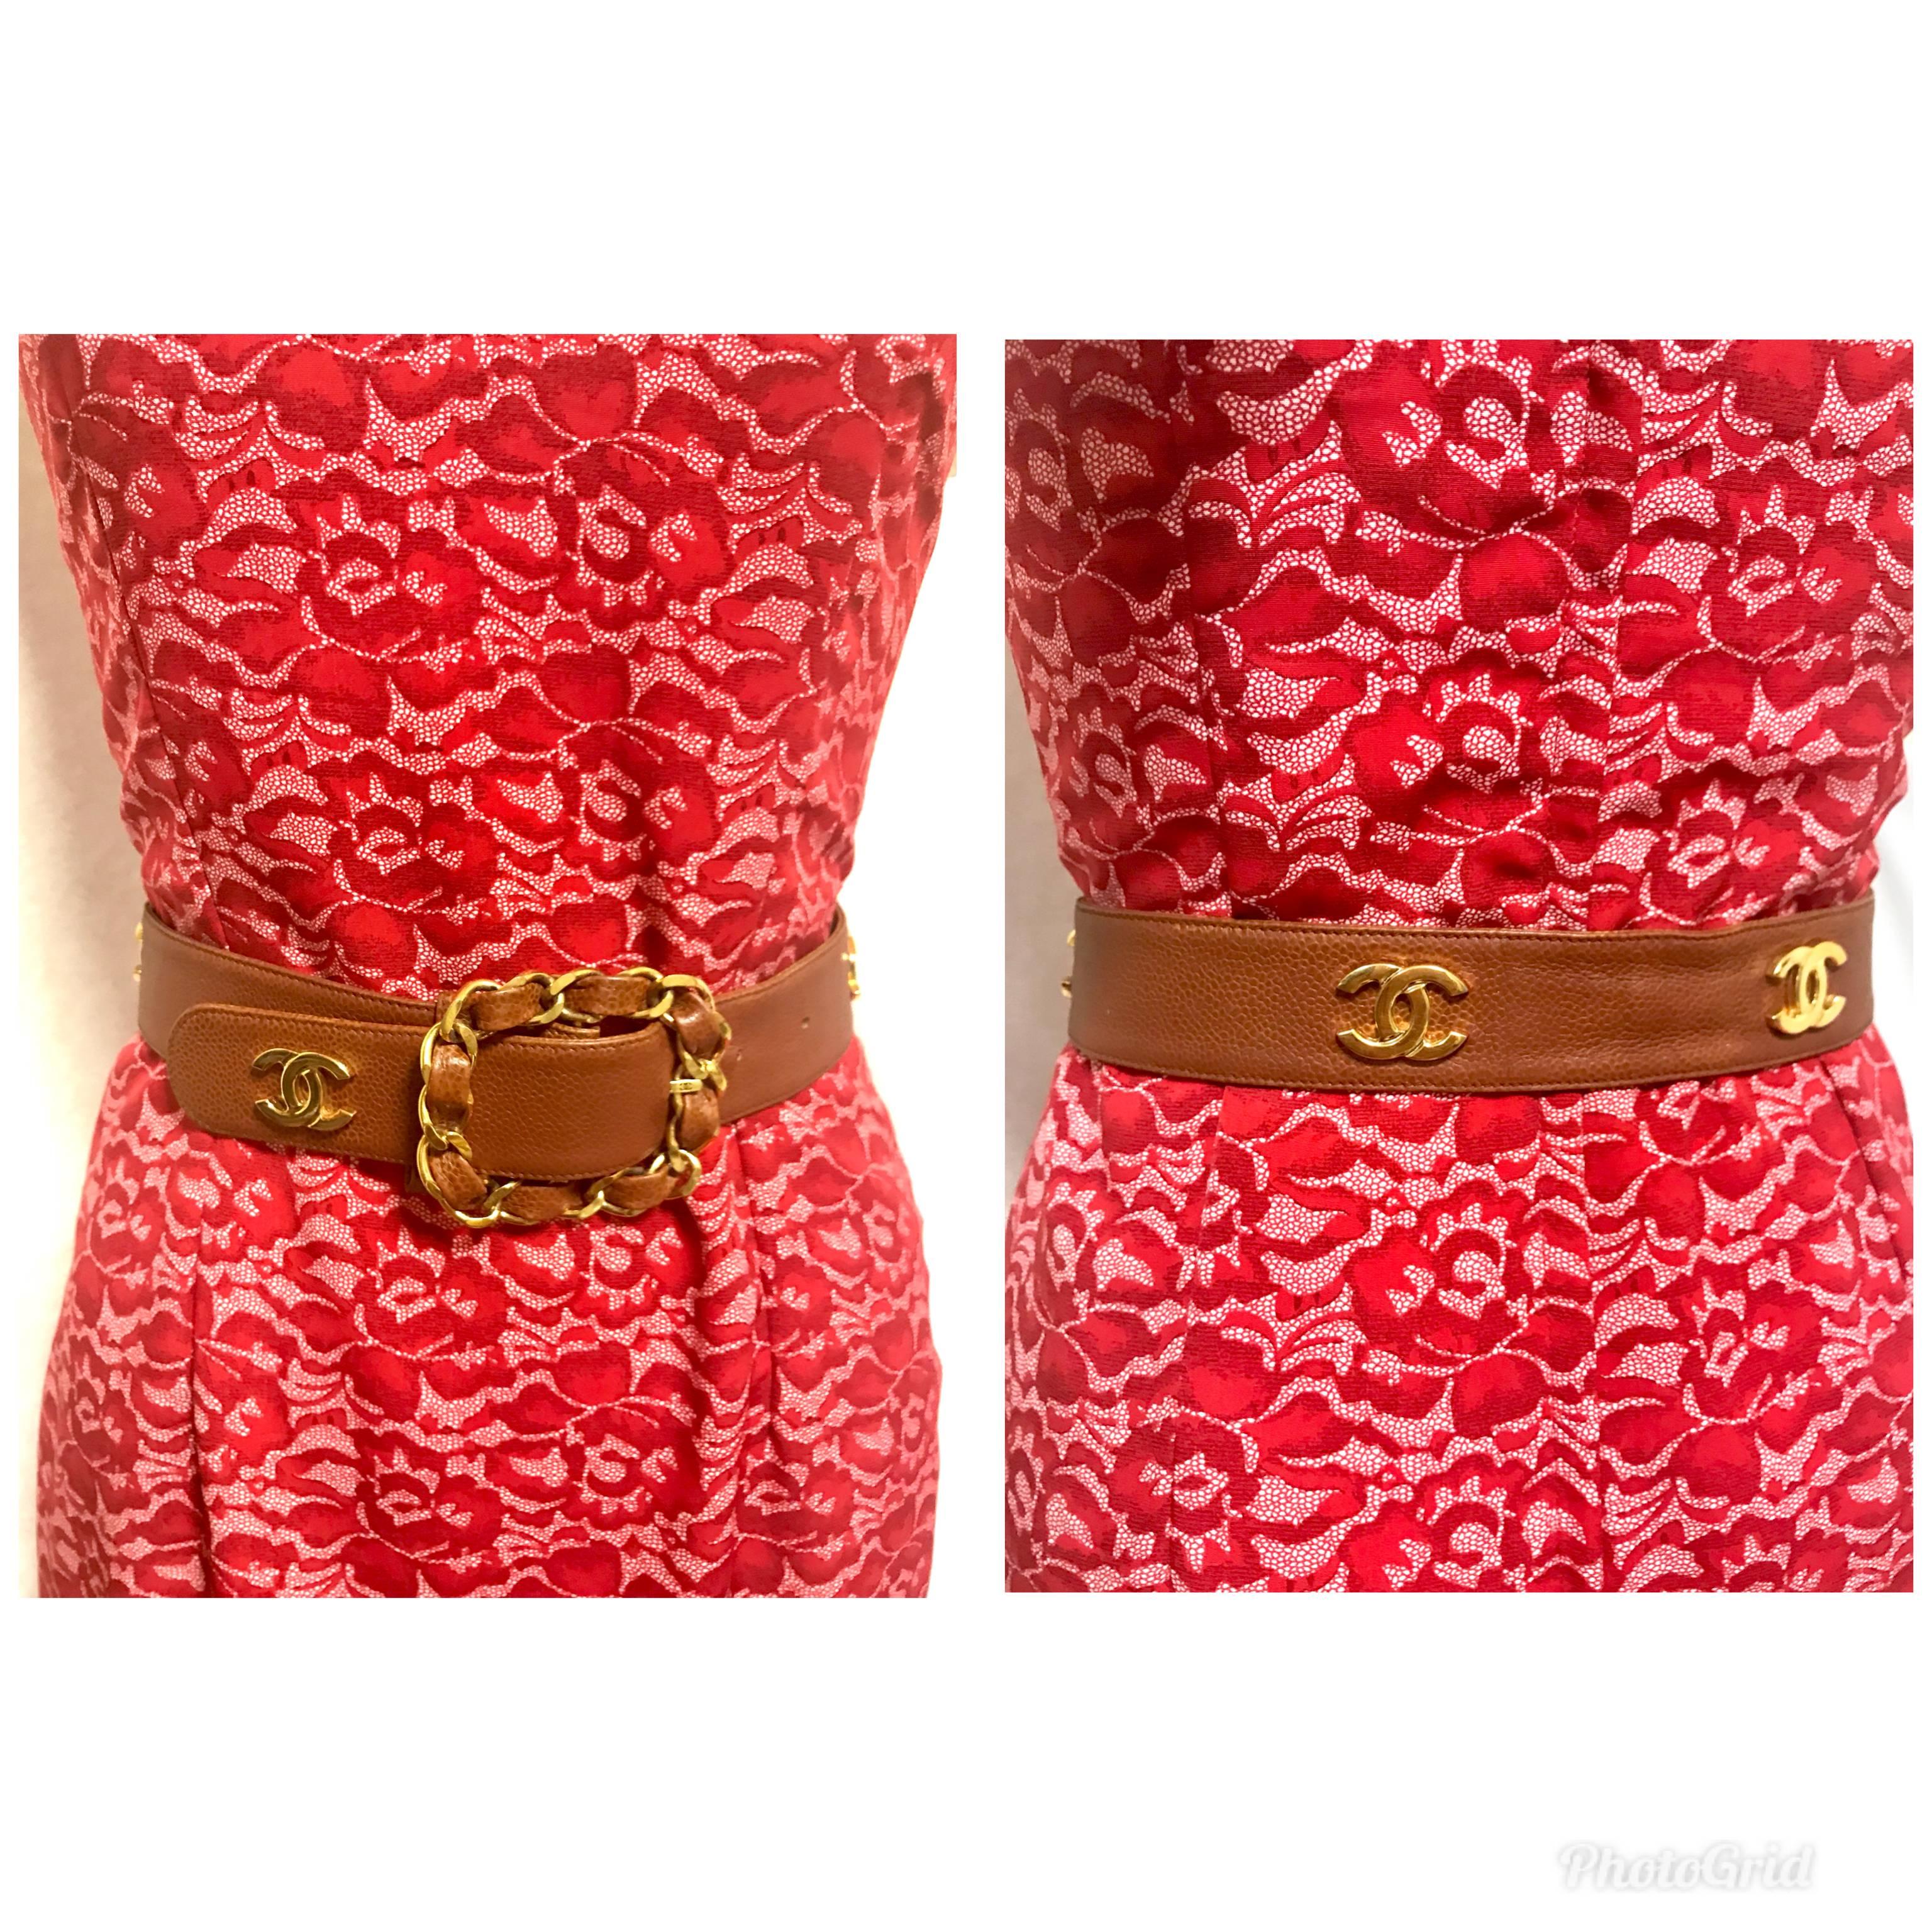 1990s. Vintage CHANEL brown caviar leather belt with golden chain buckle and iconic golden CC mark motifs. Must-have belt from CHANEL.

Here is another fabulous piece from CHANEL back in the era.
Introducing a brown caviar leather belt with its